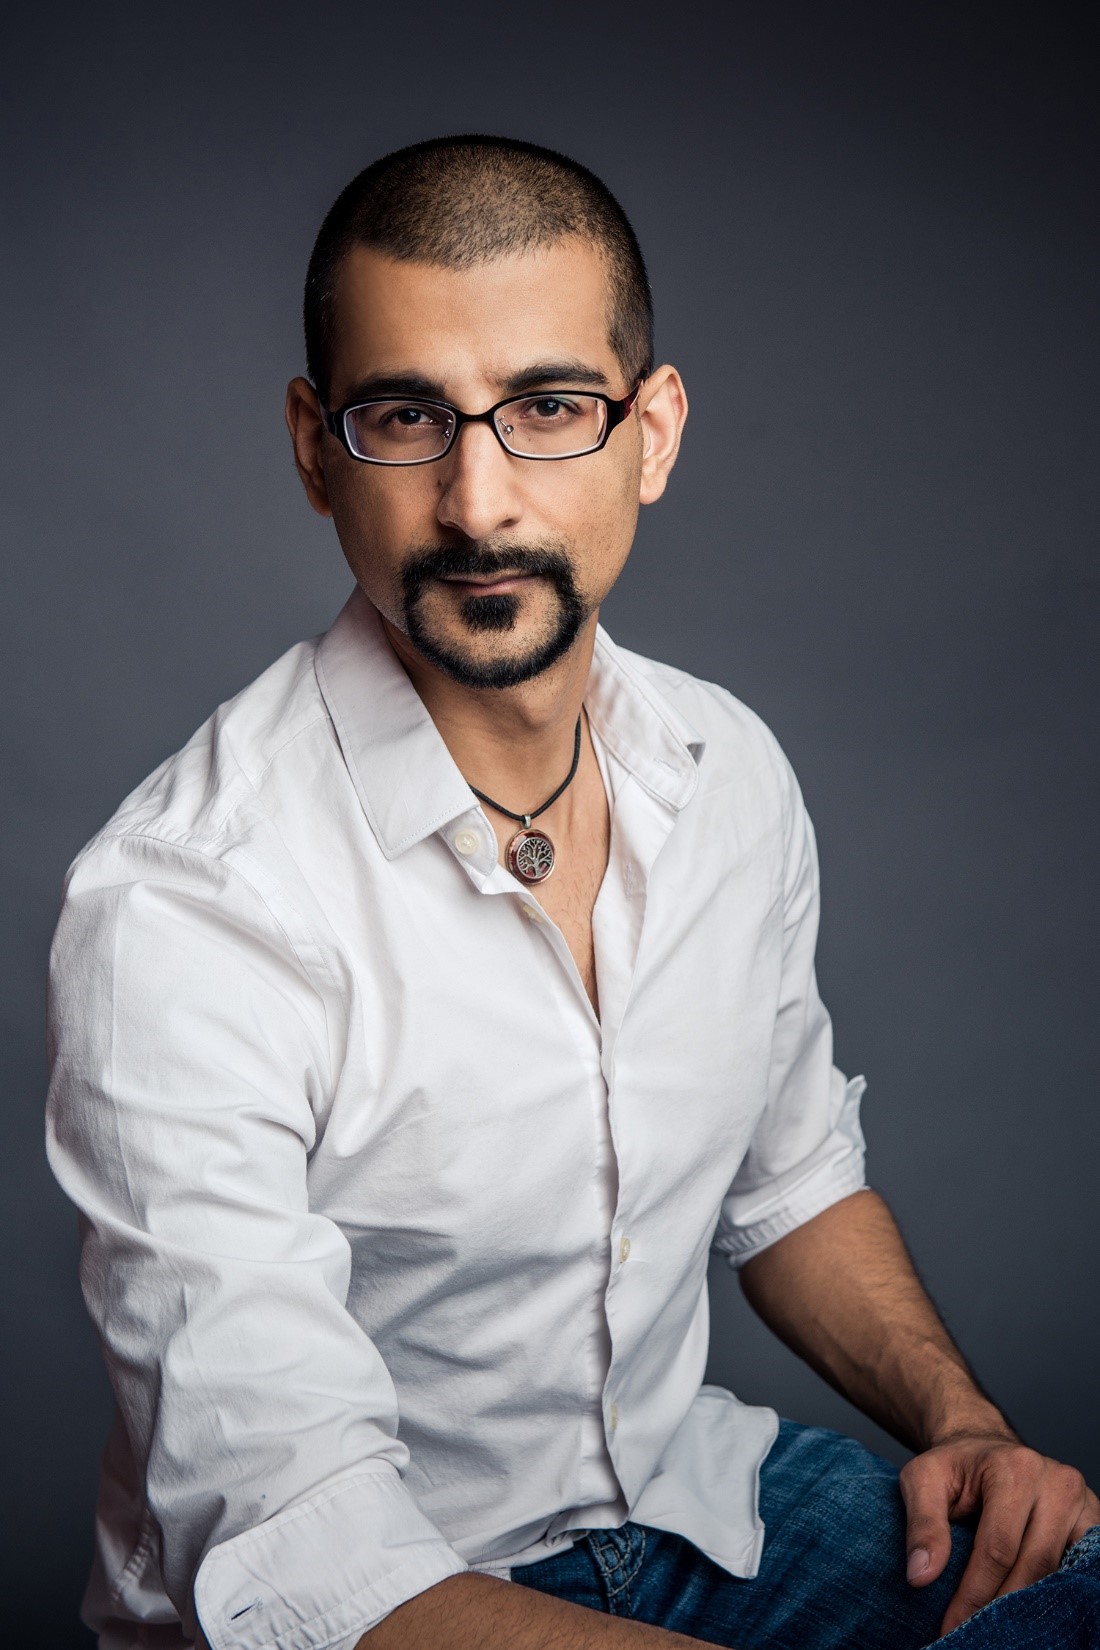 A headshot of smiling Neil Mehta who has buzz-cut black hair, a mustache, and a black beard. He is wearing a white collared shirt, glasses, and a black necklace with a pendant.